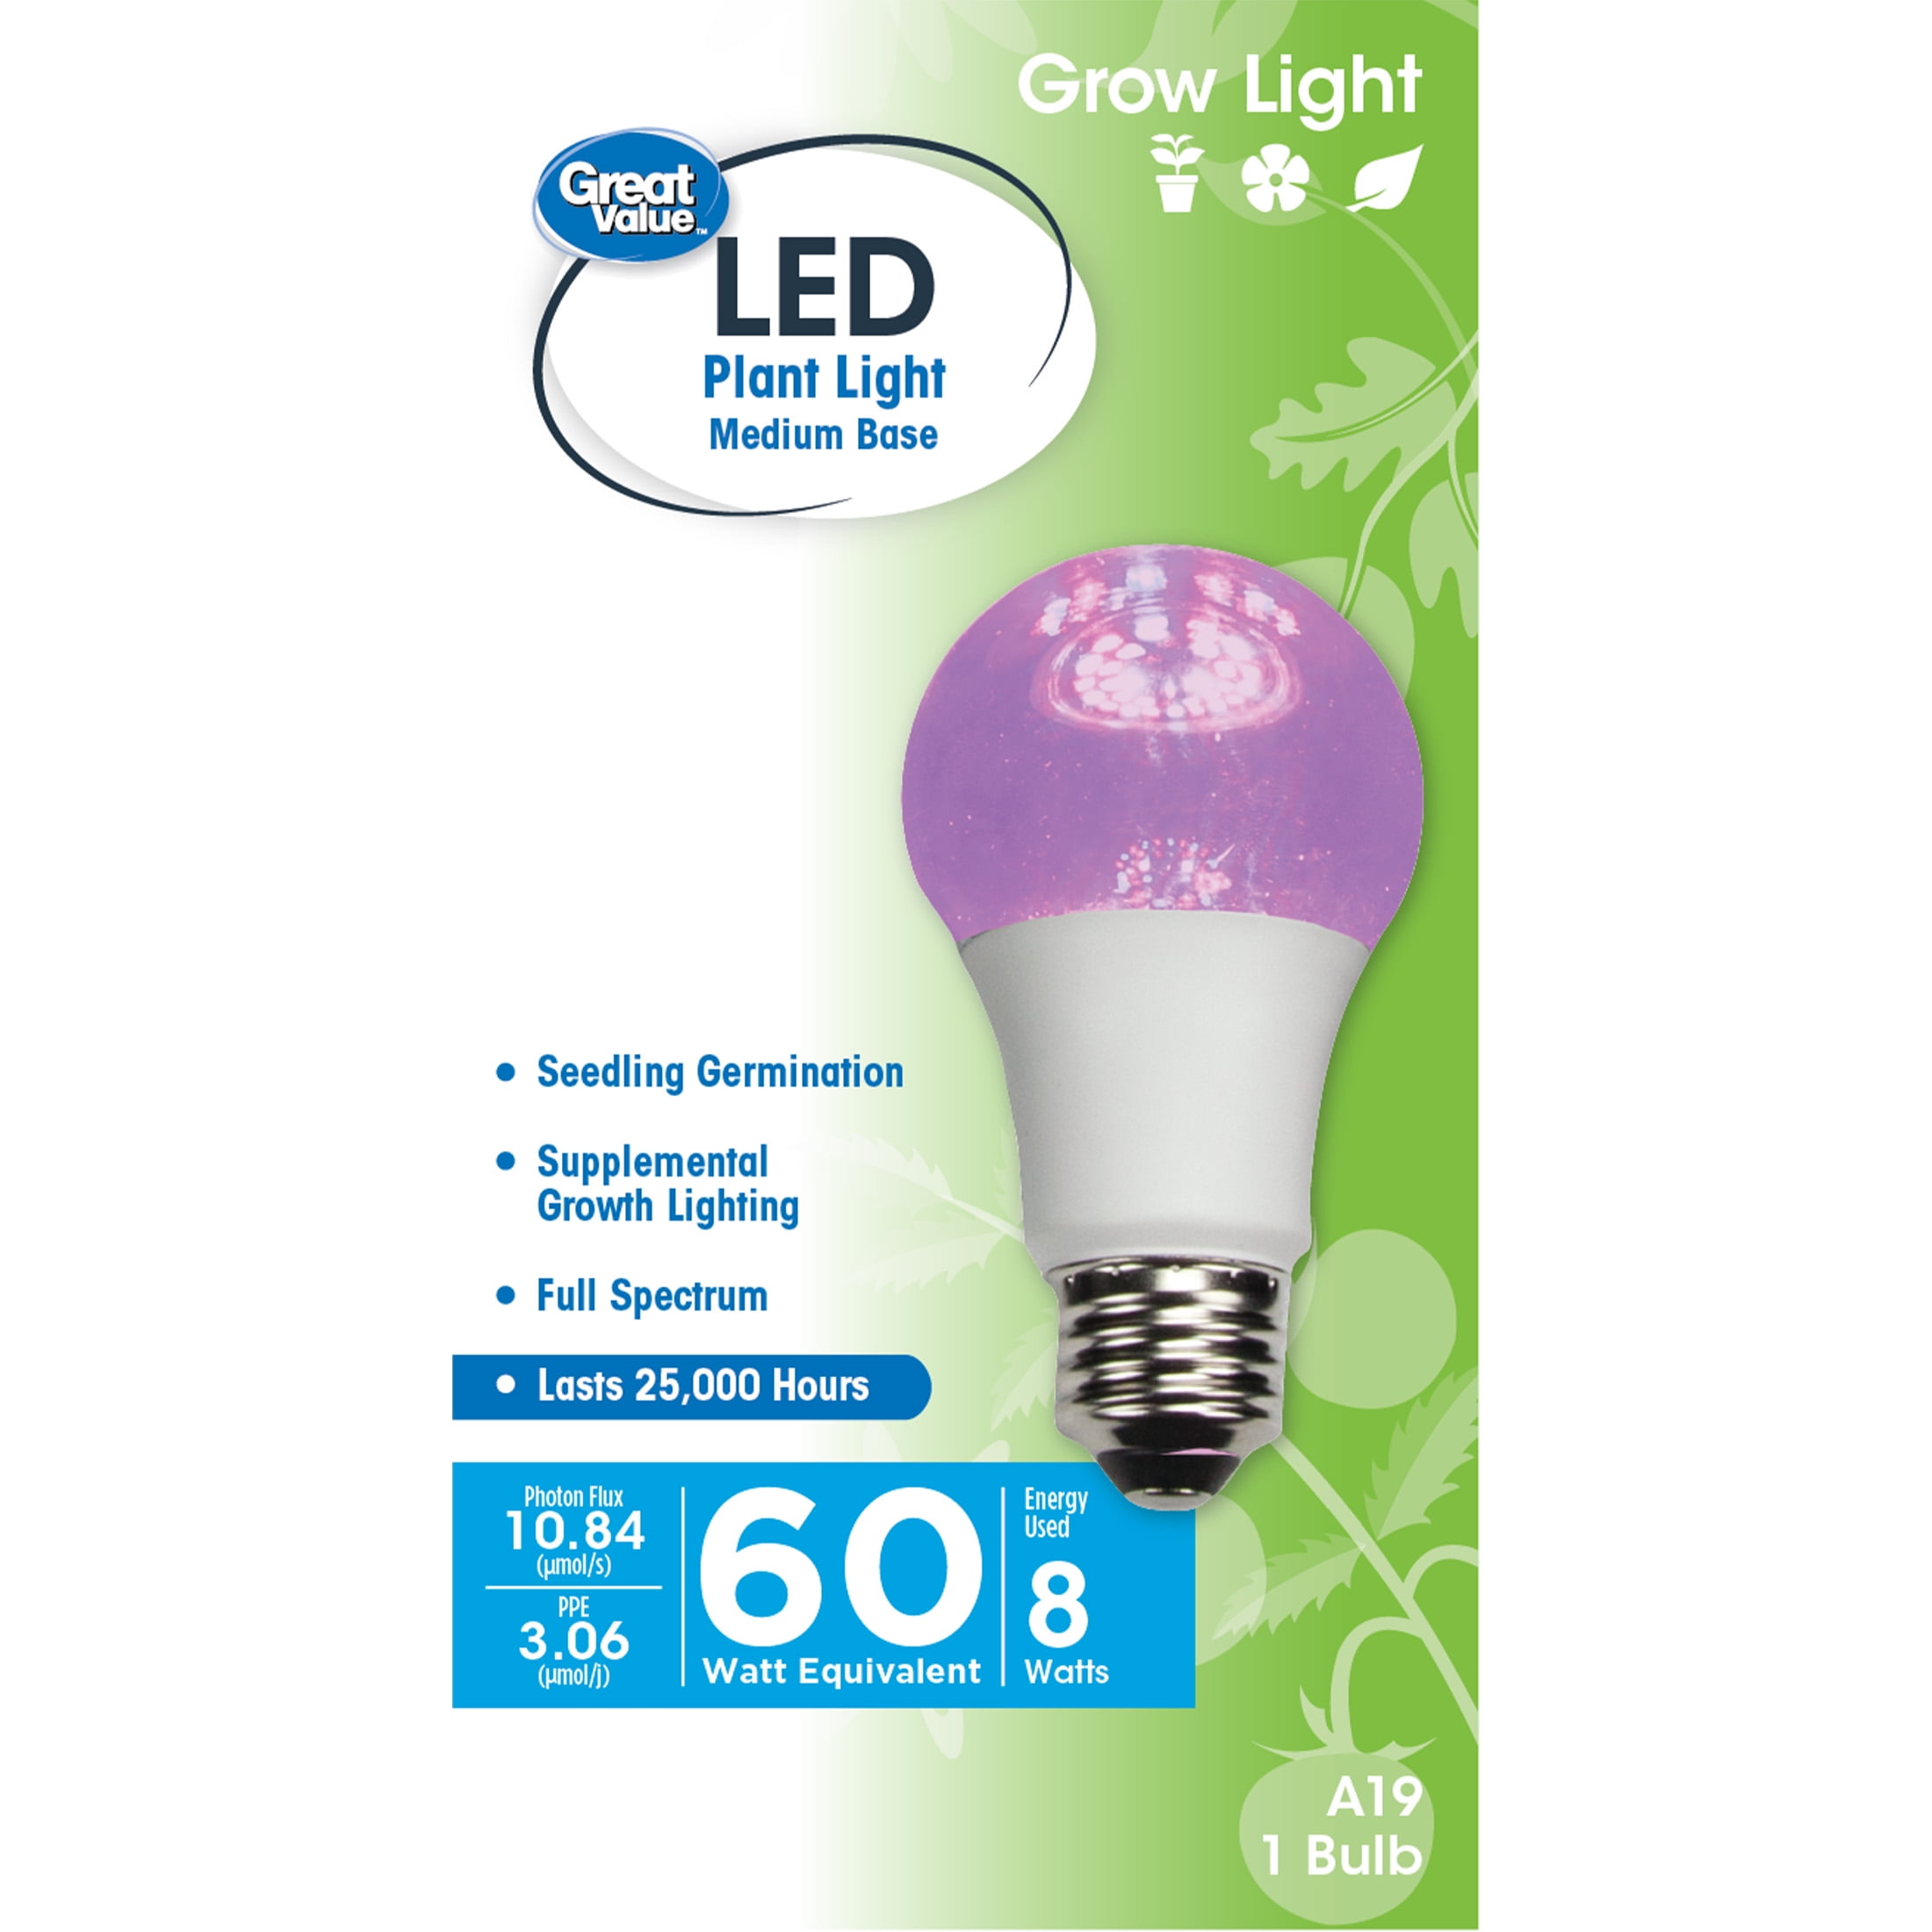 Great Value LED Light Bulb, 8W (60W Equivalent) A19 Grow Light E26 Medium Base, Non-Dimmable, Large Plant, 1-Pack